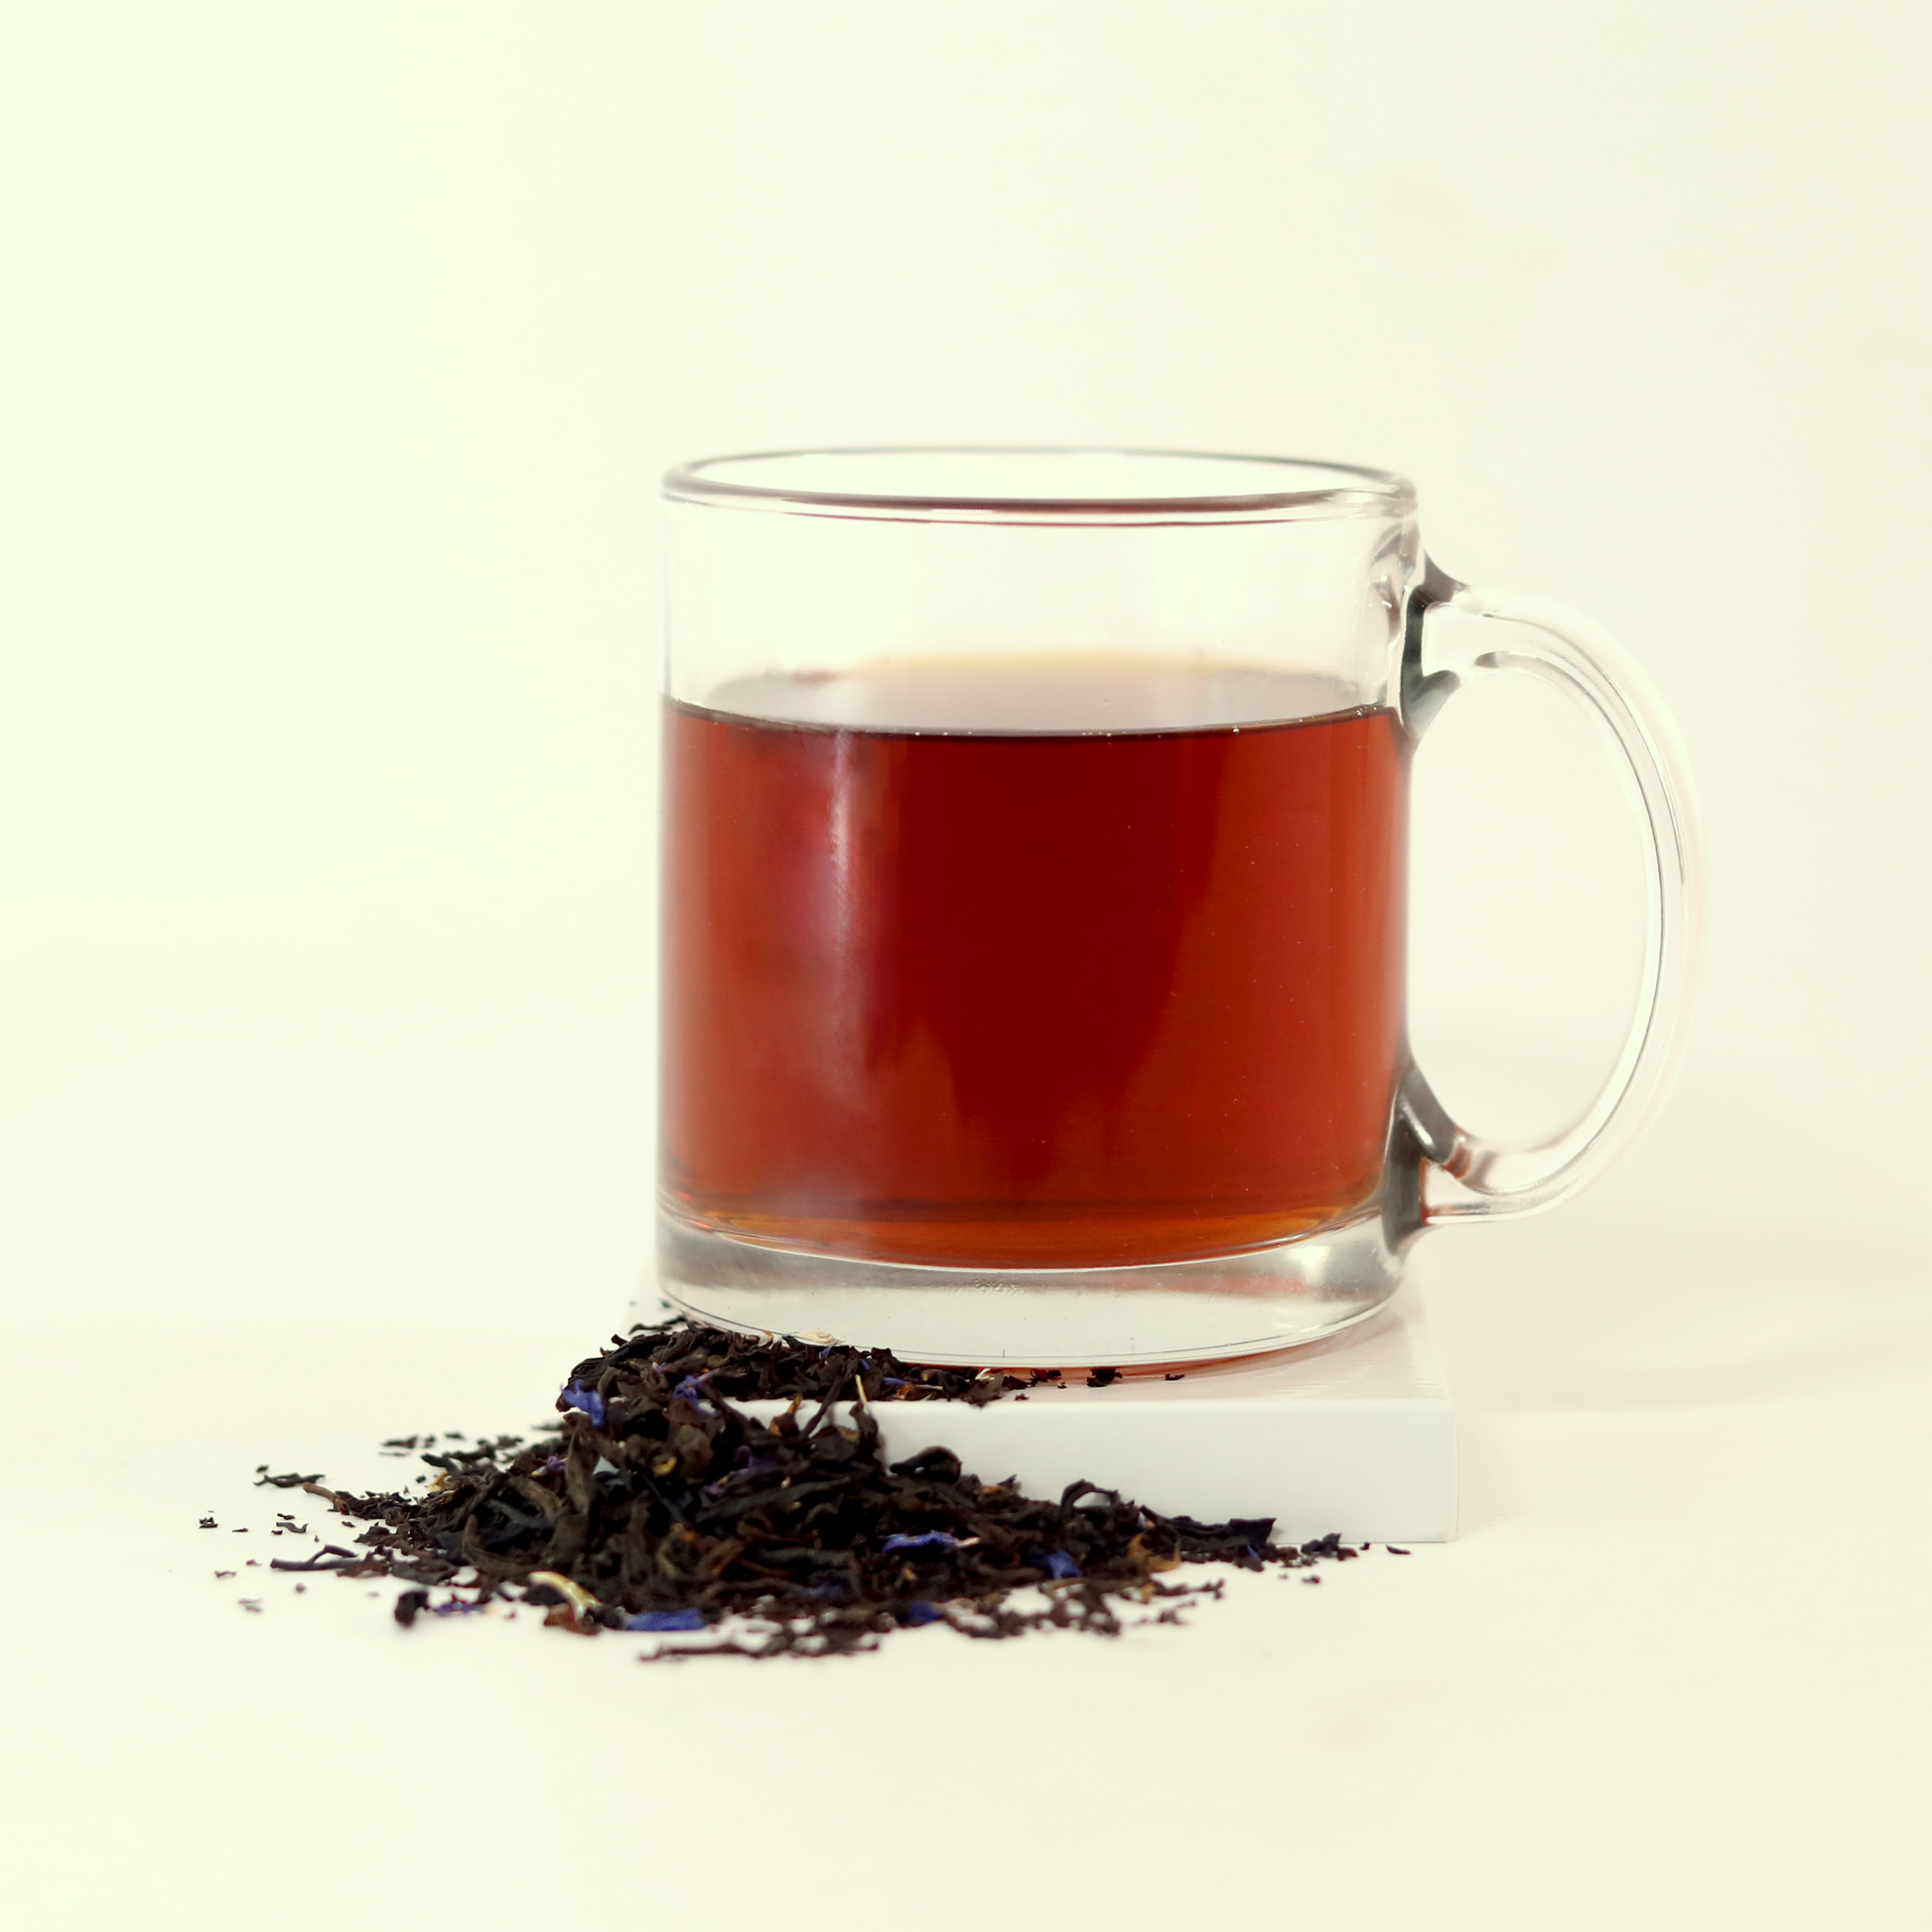  A clear glass mug filled with reddish-orange tea - Blue Fields Earl Grey -  next to a small pile of dried tea leaves. A Good Store product.